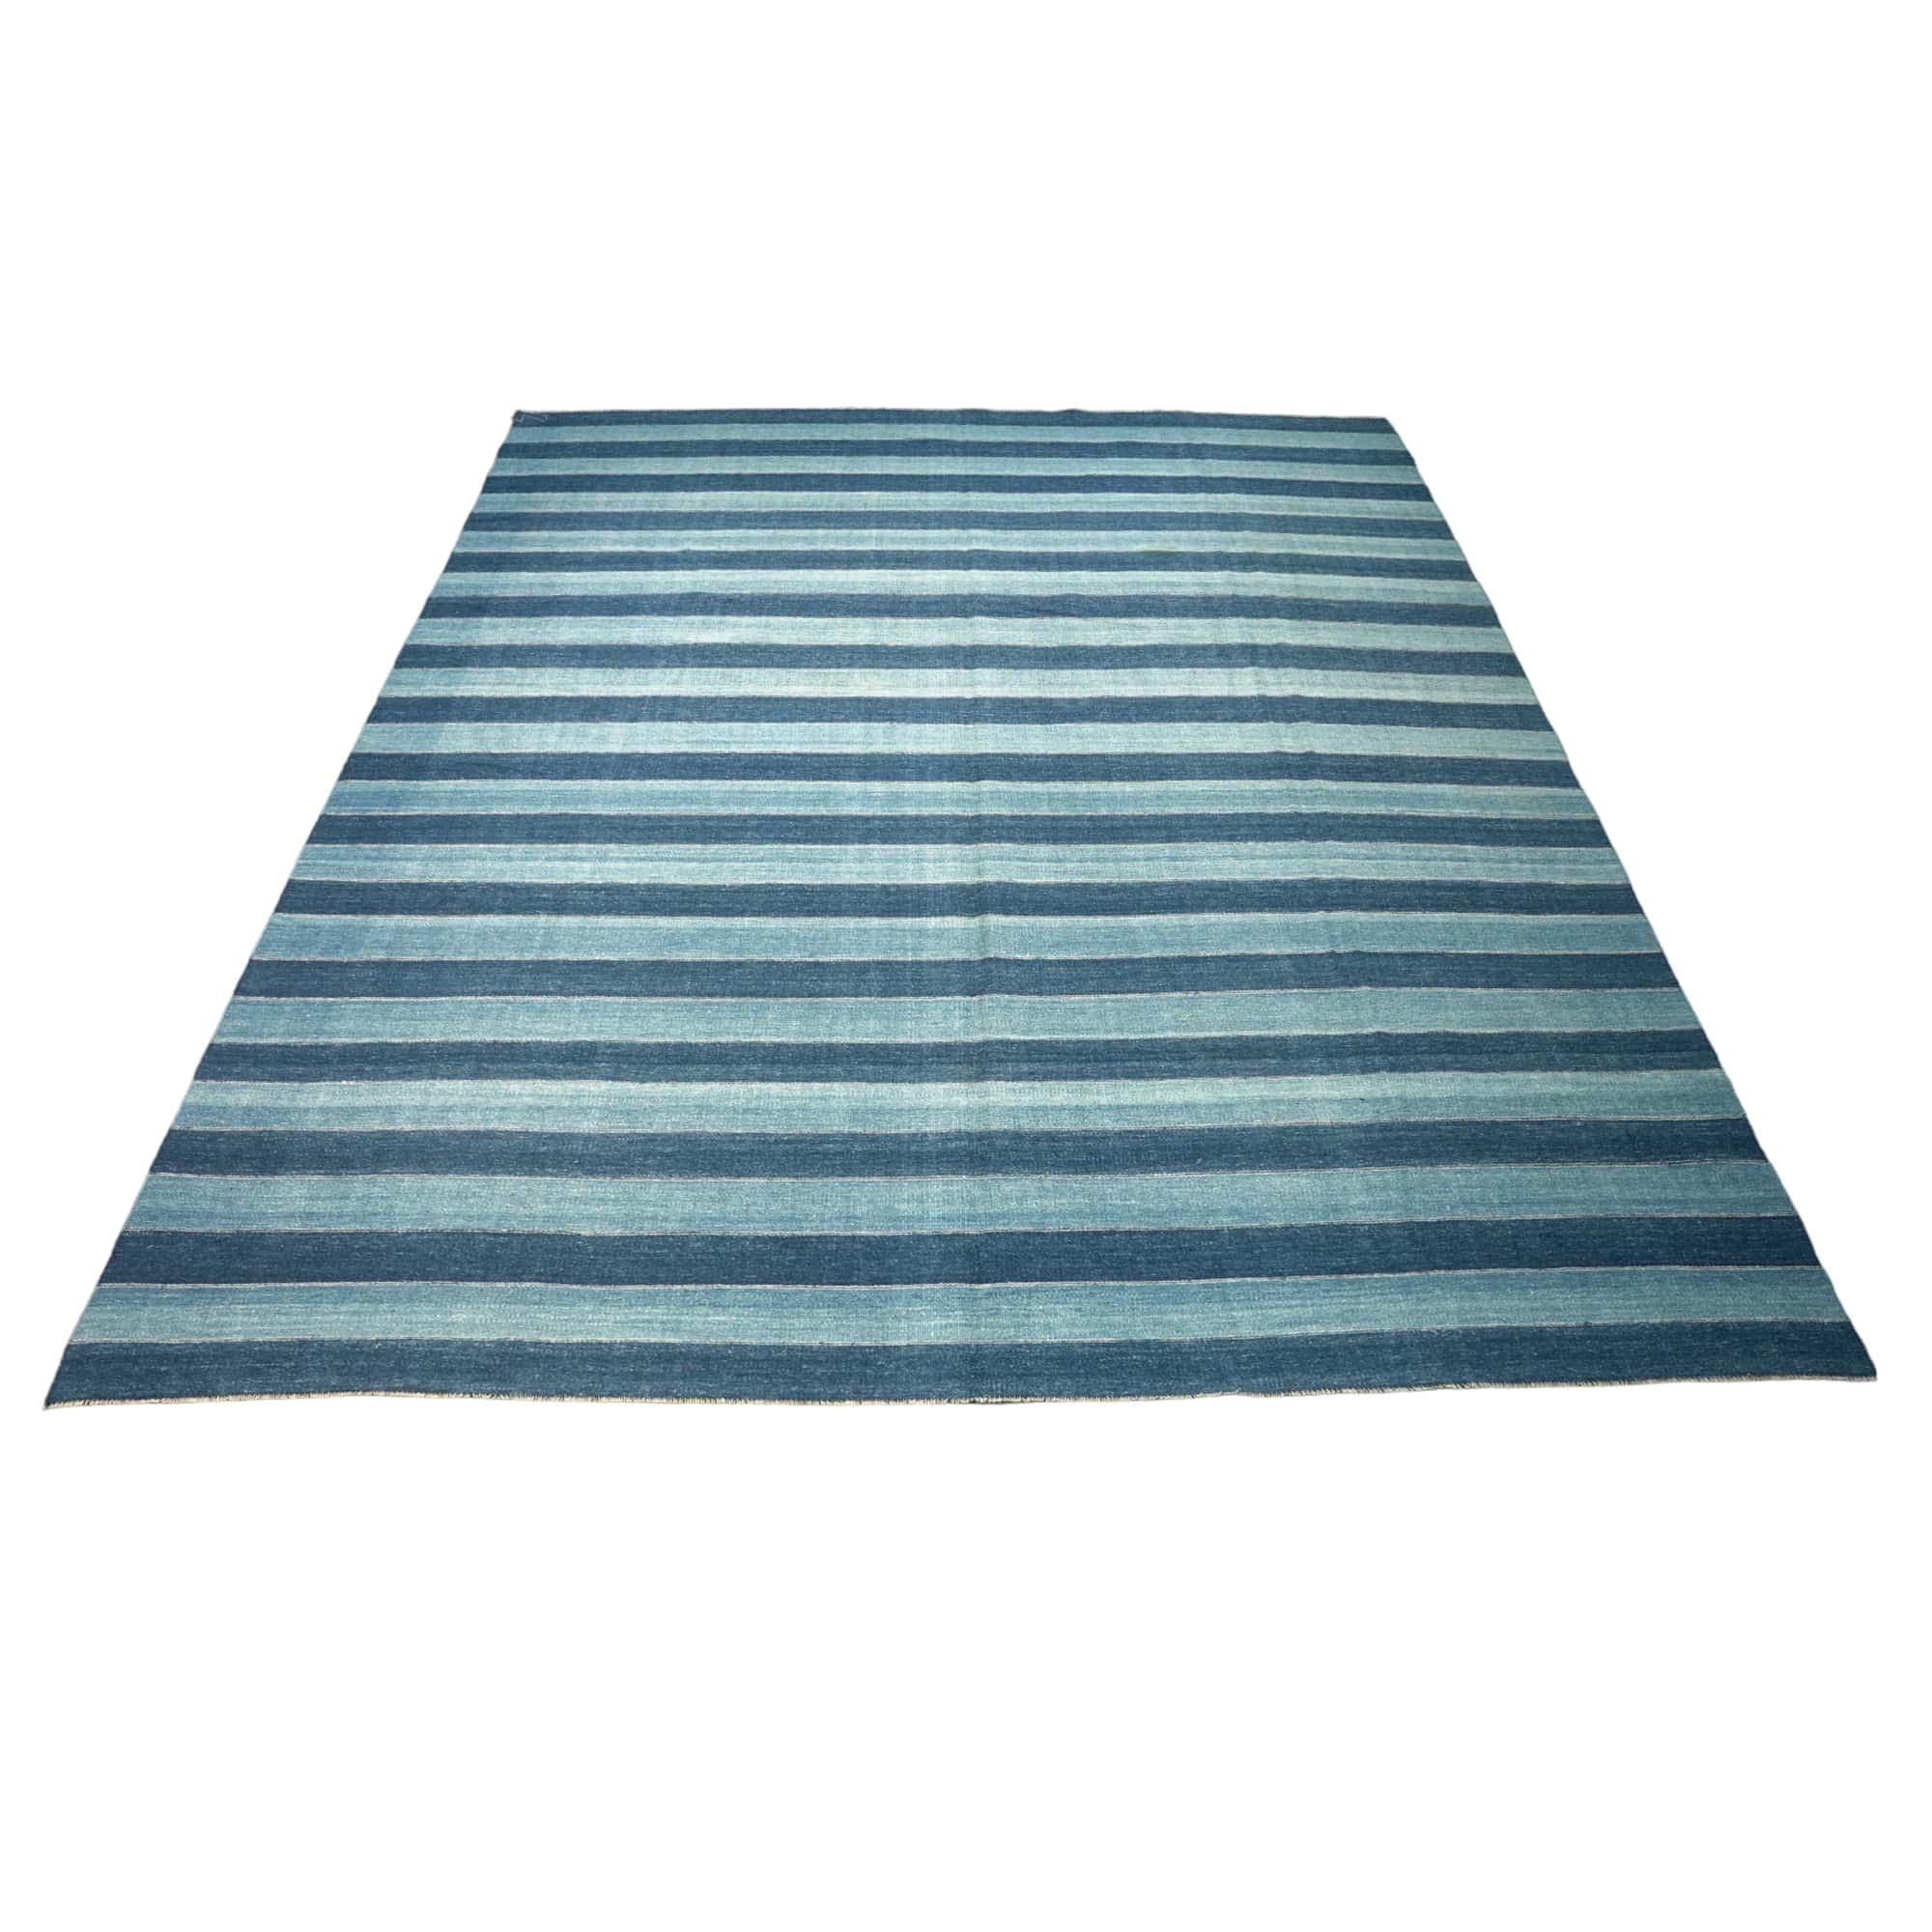 Vintage Dhurrie Rug, with Blue Stripes, from Rug & Kilim For Sale